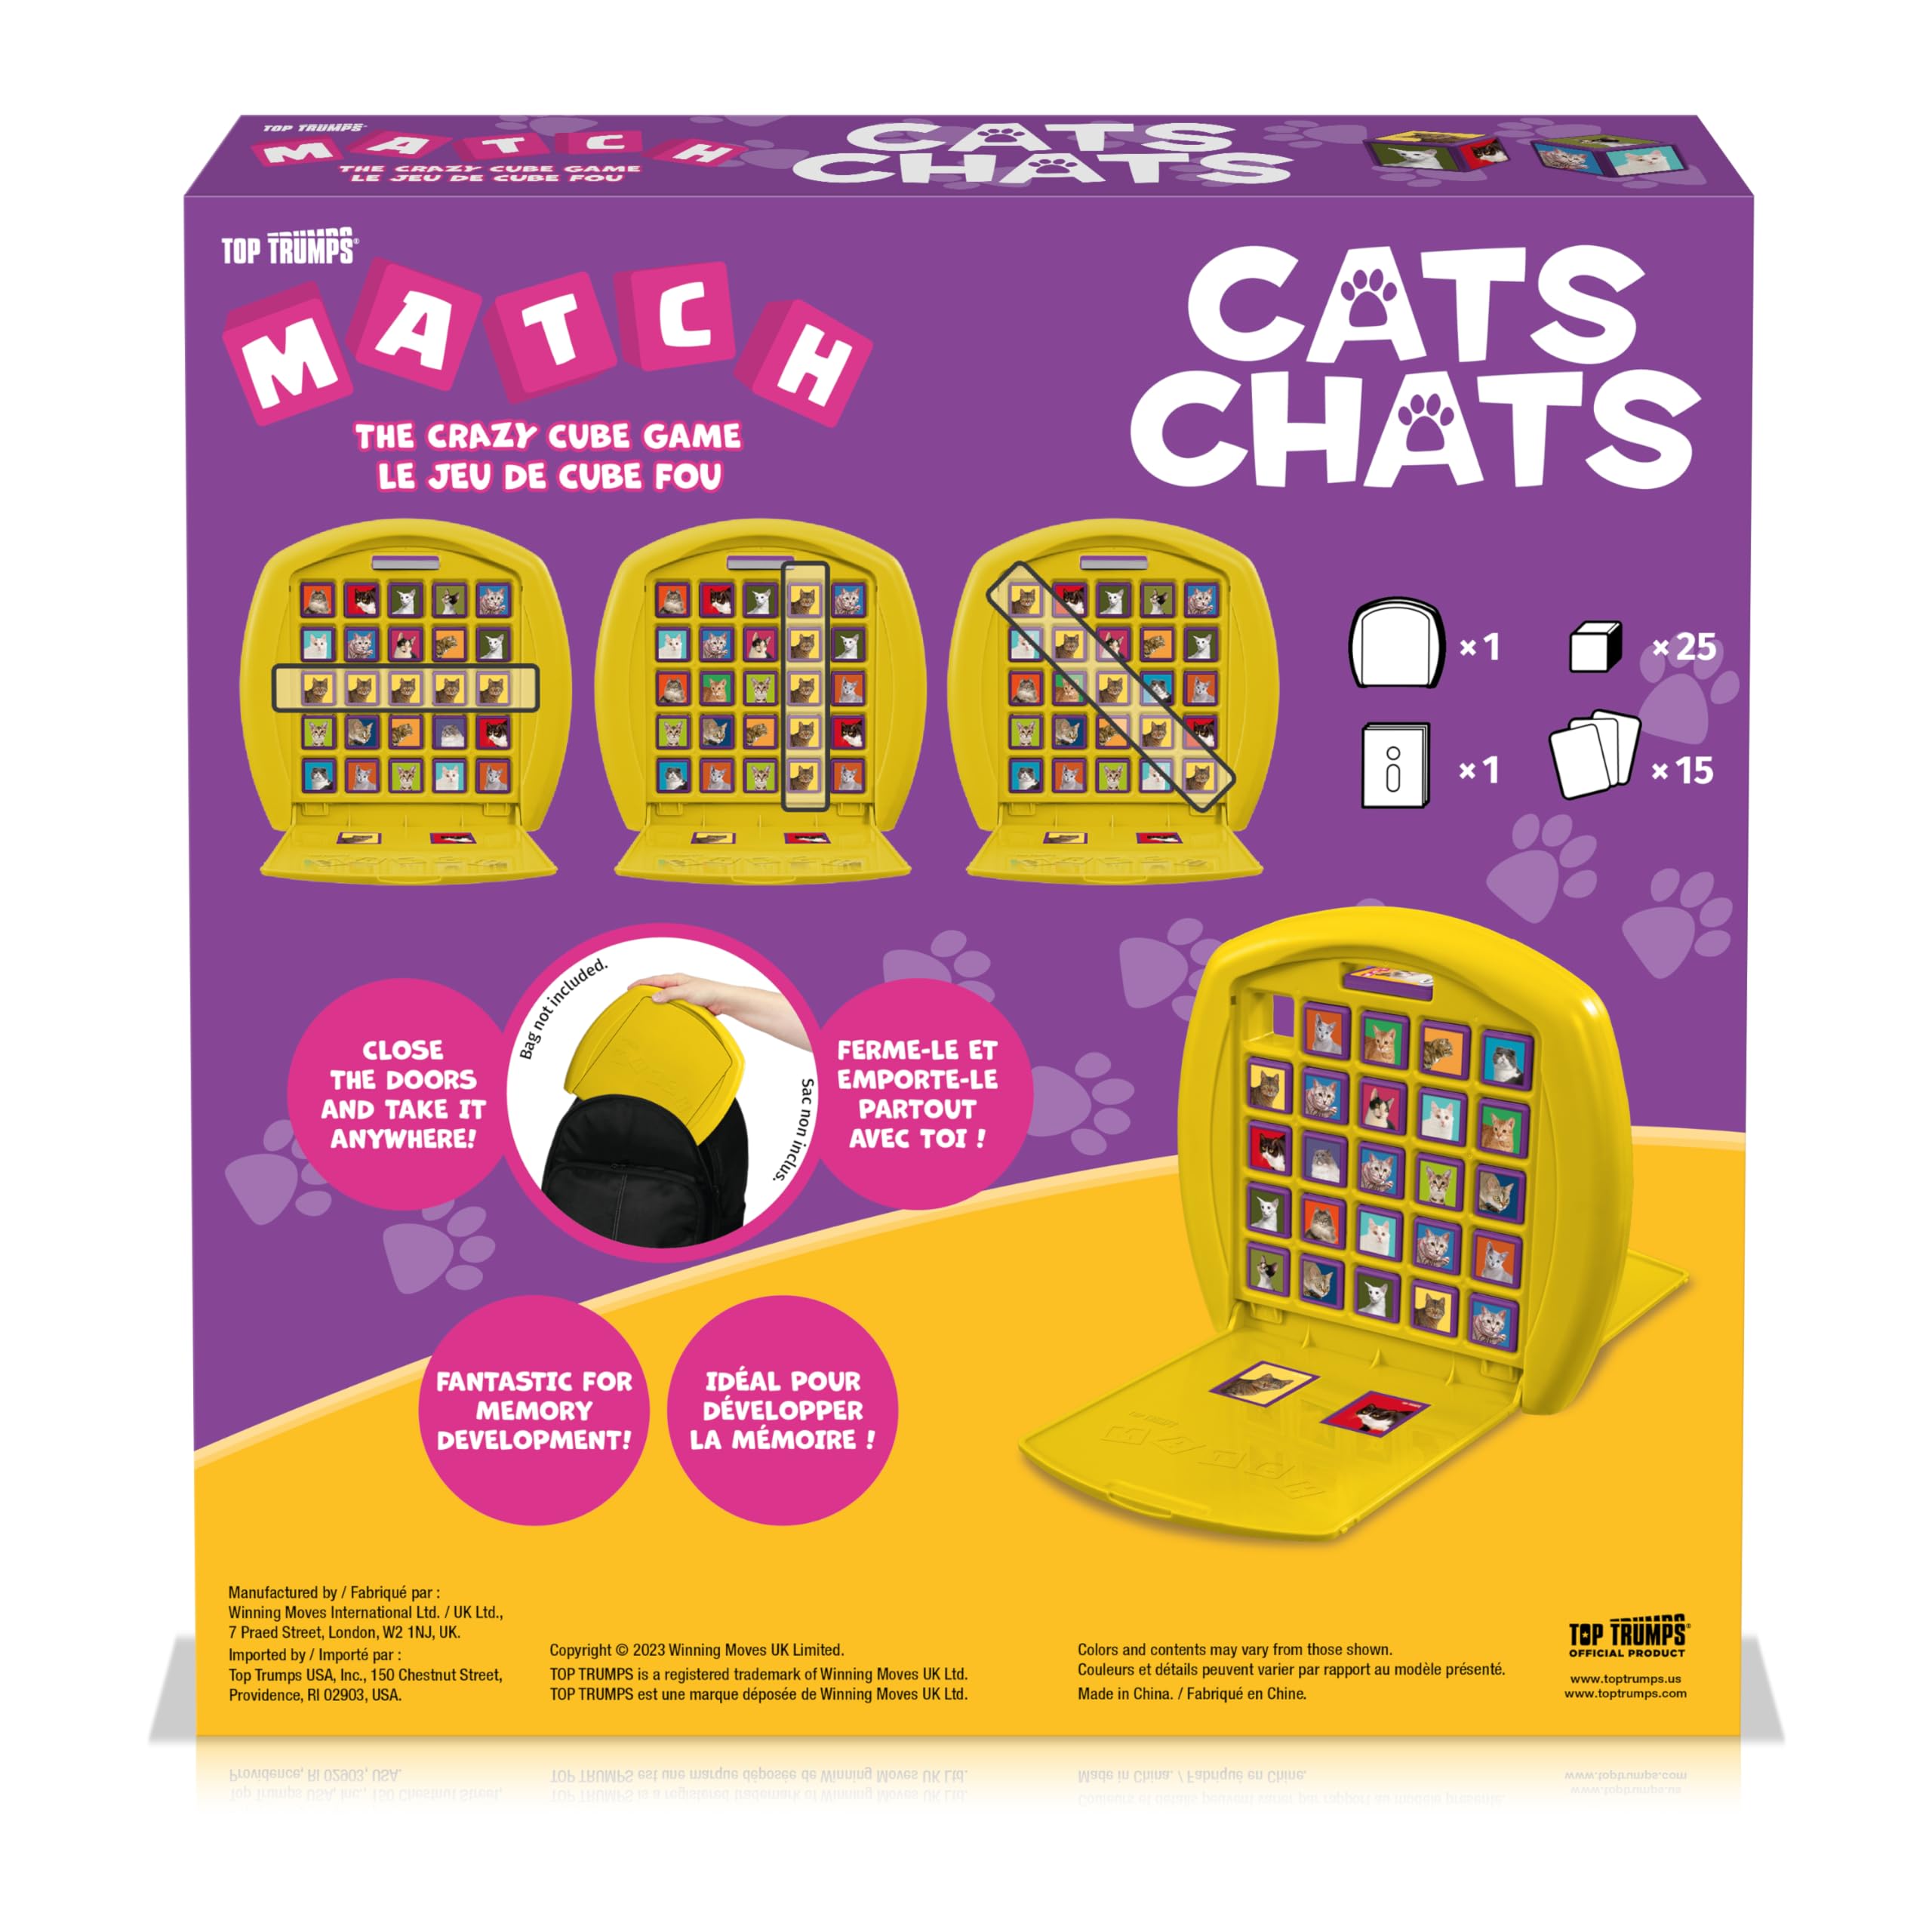 Cats Top Trumps Match Board Game; Matching Cube Game with Kitties Like ragdolls, Manx, and More Family Game for Ages 4 and up